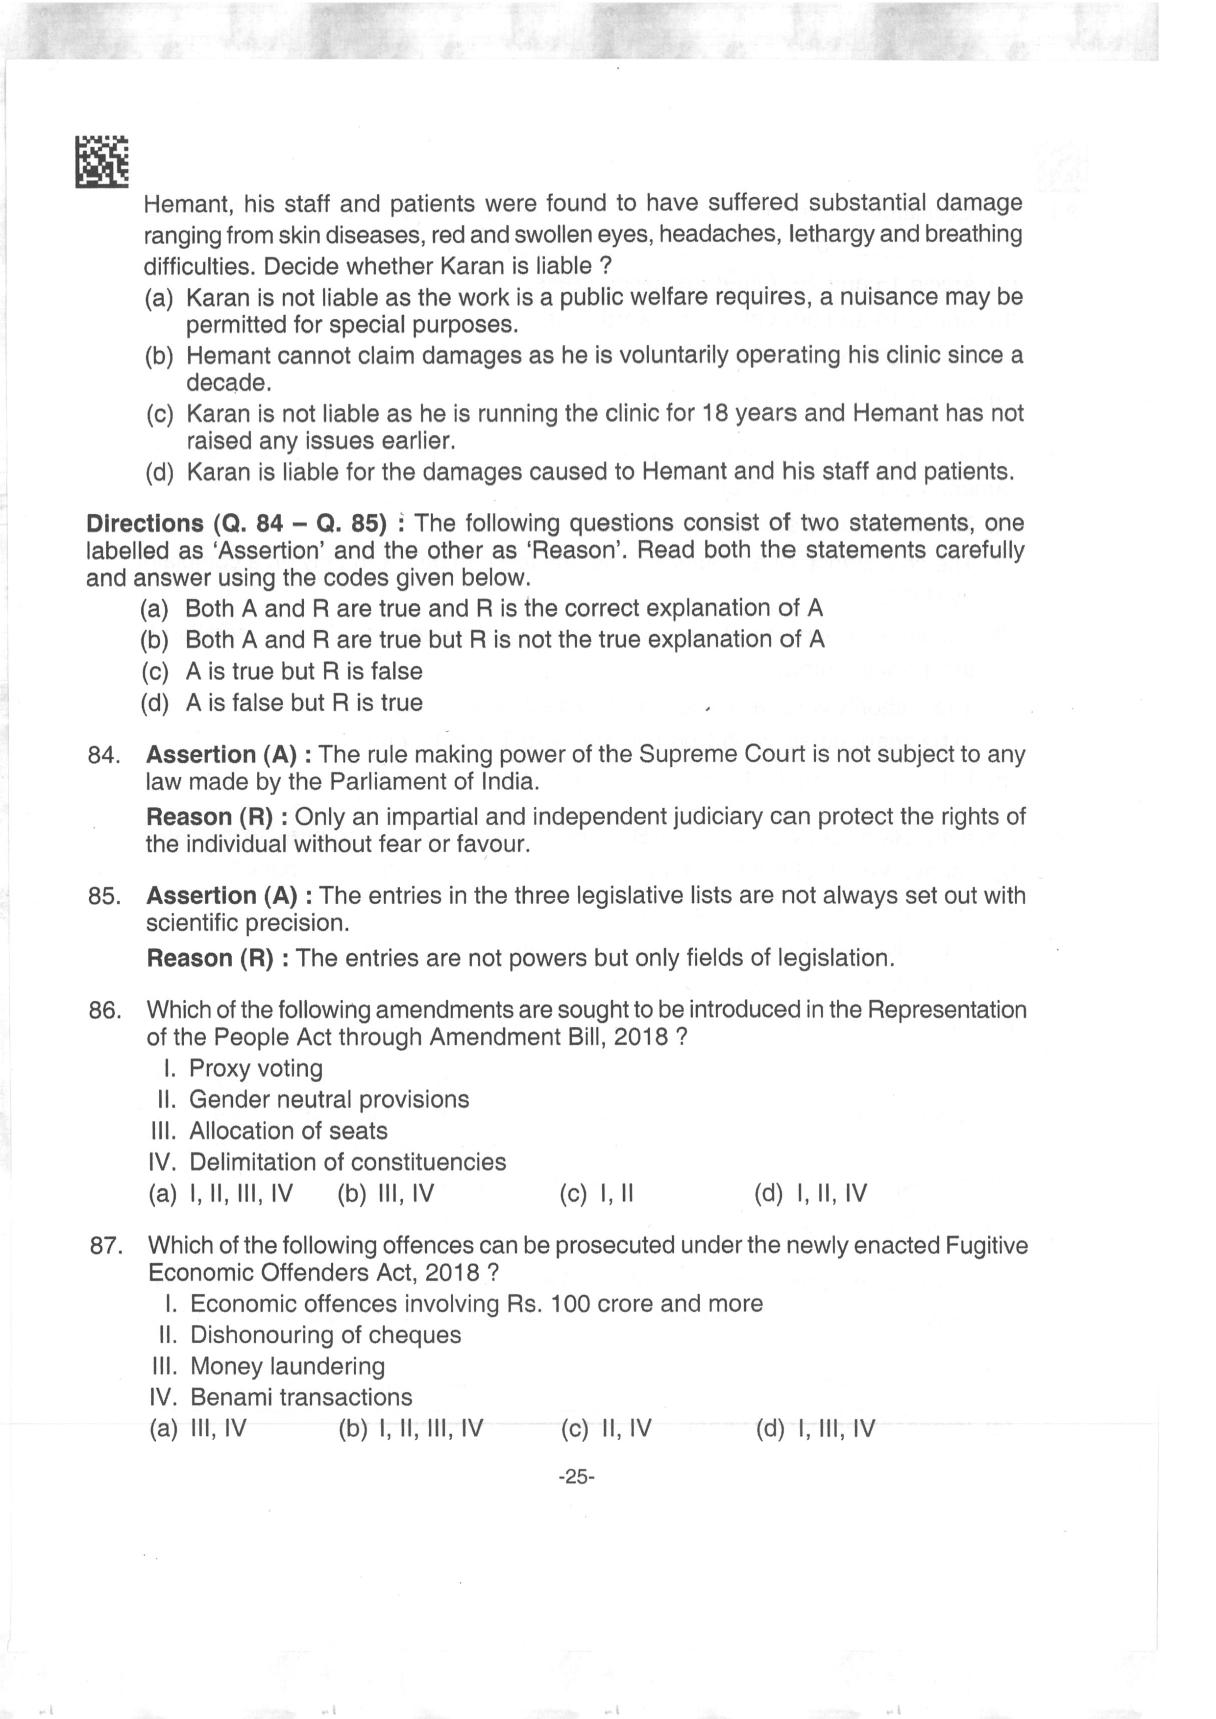 AILET 2019 Question Paper for BA LLB - Page 25